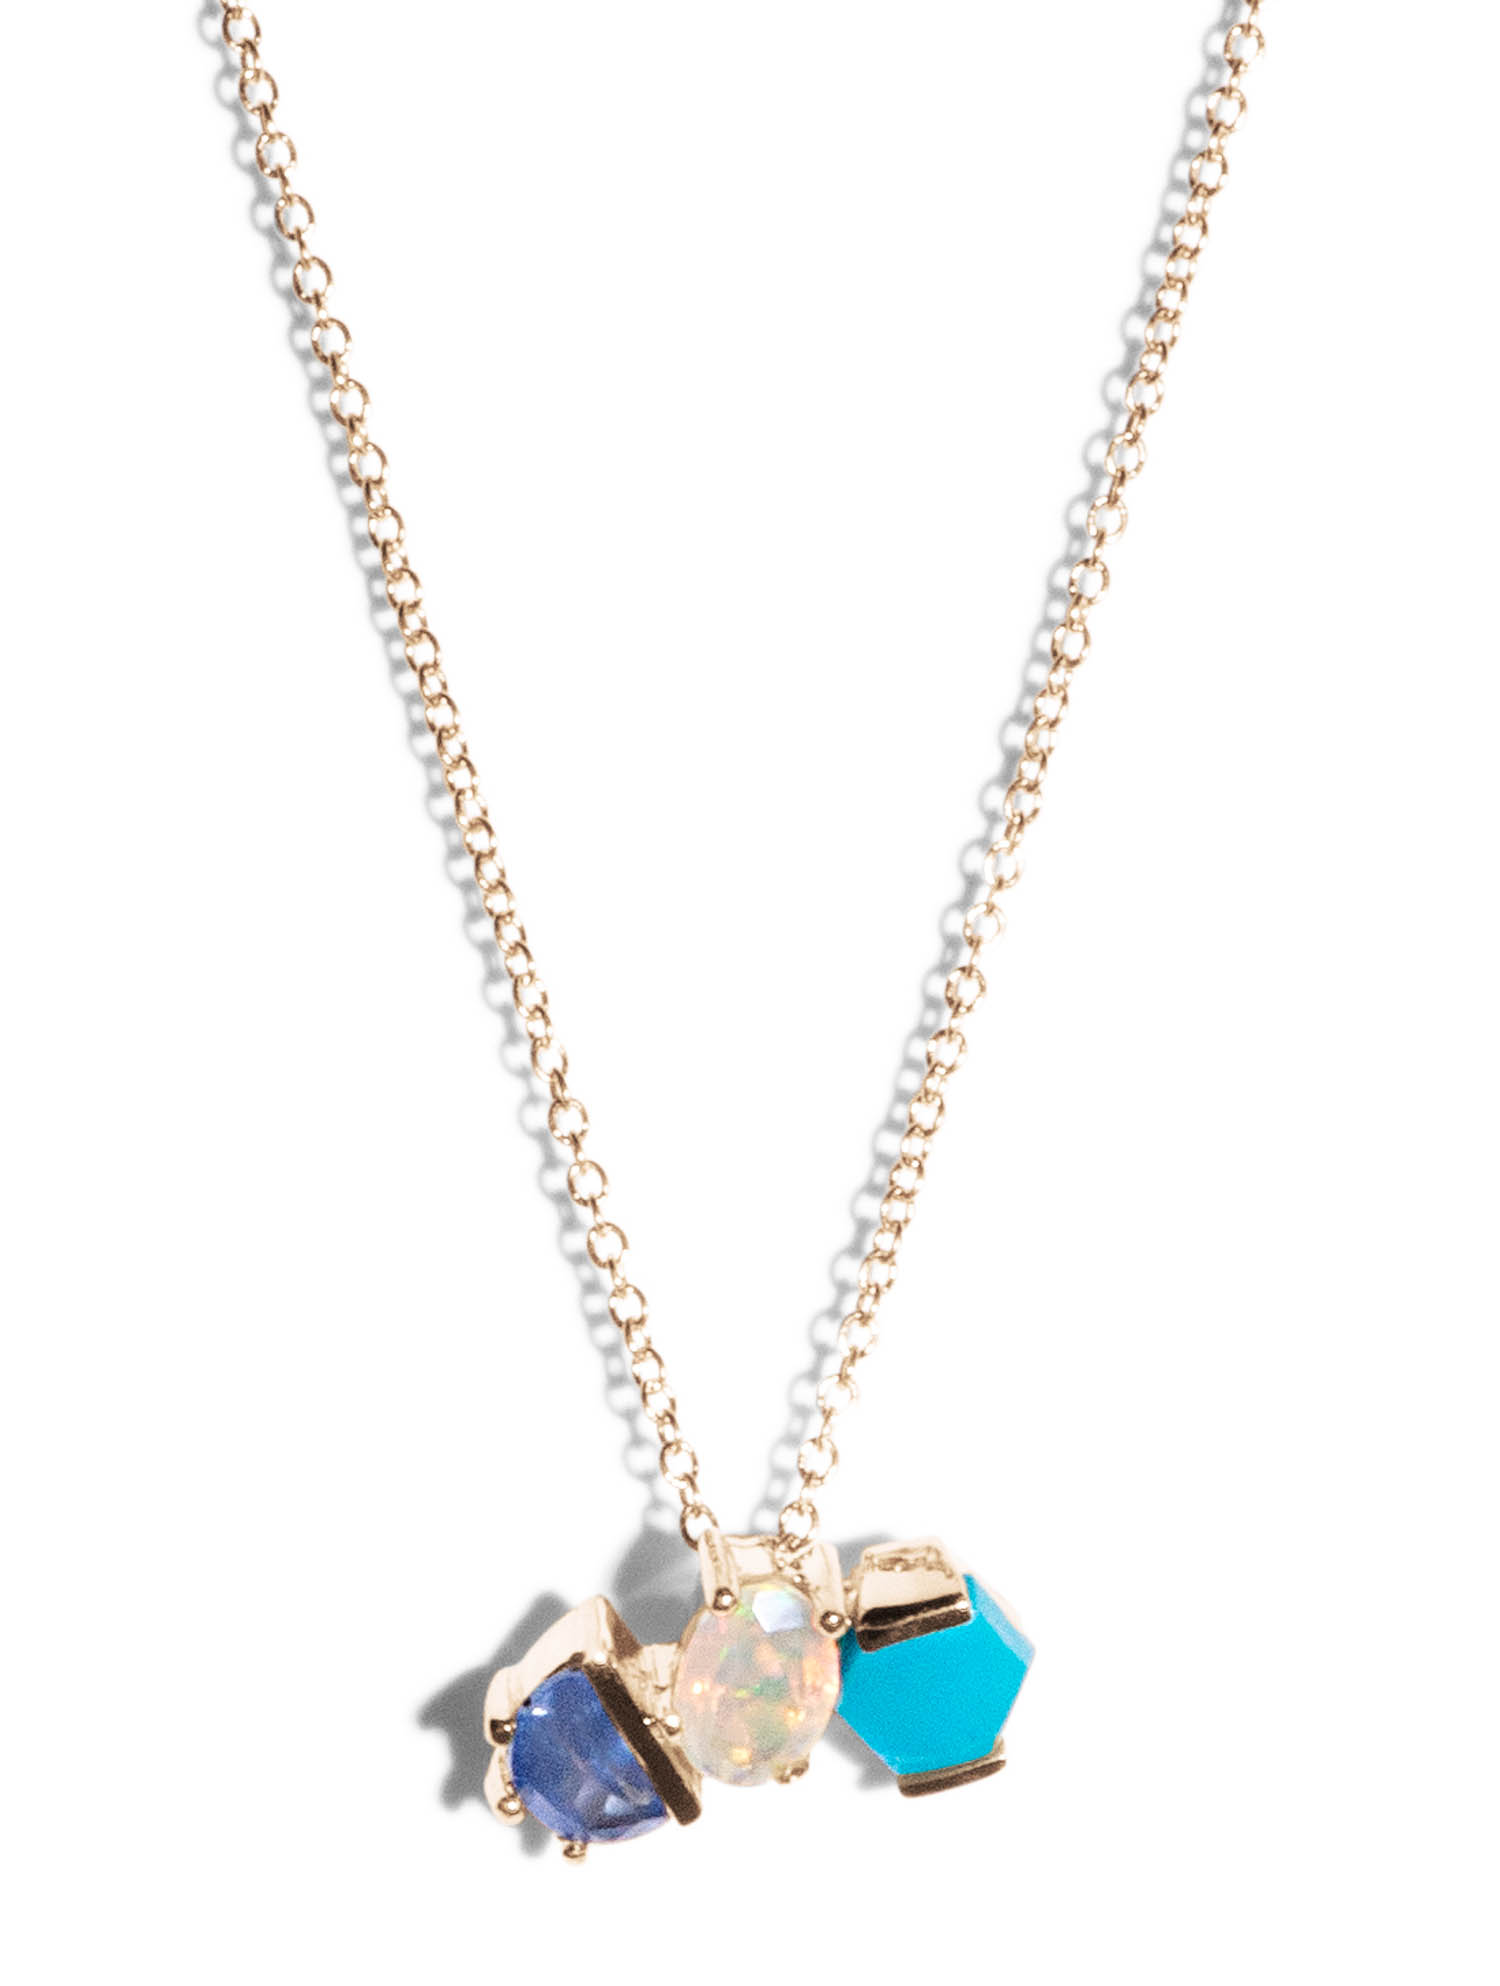 Custom Opal, Turquoise, and Blue Sapphire Necklace - Bario Neal